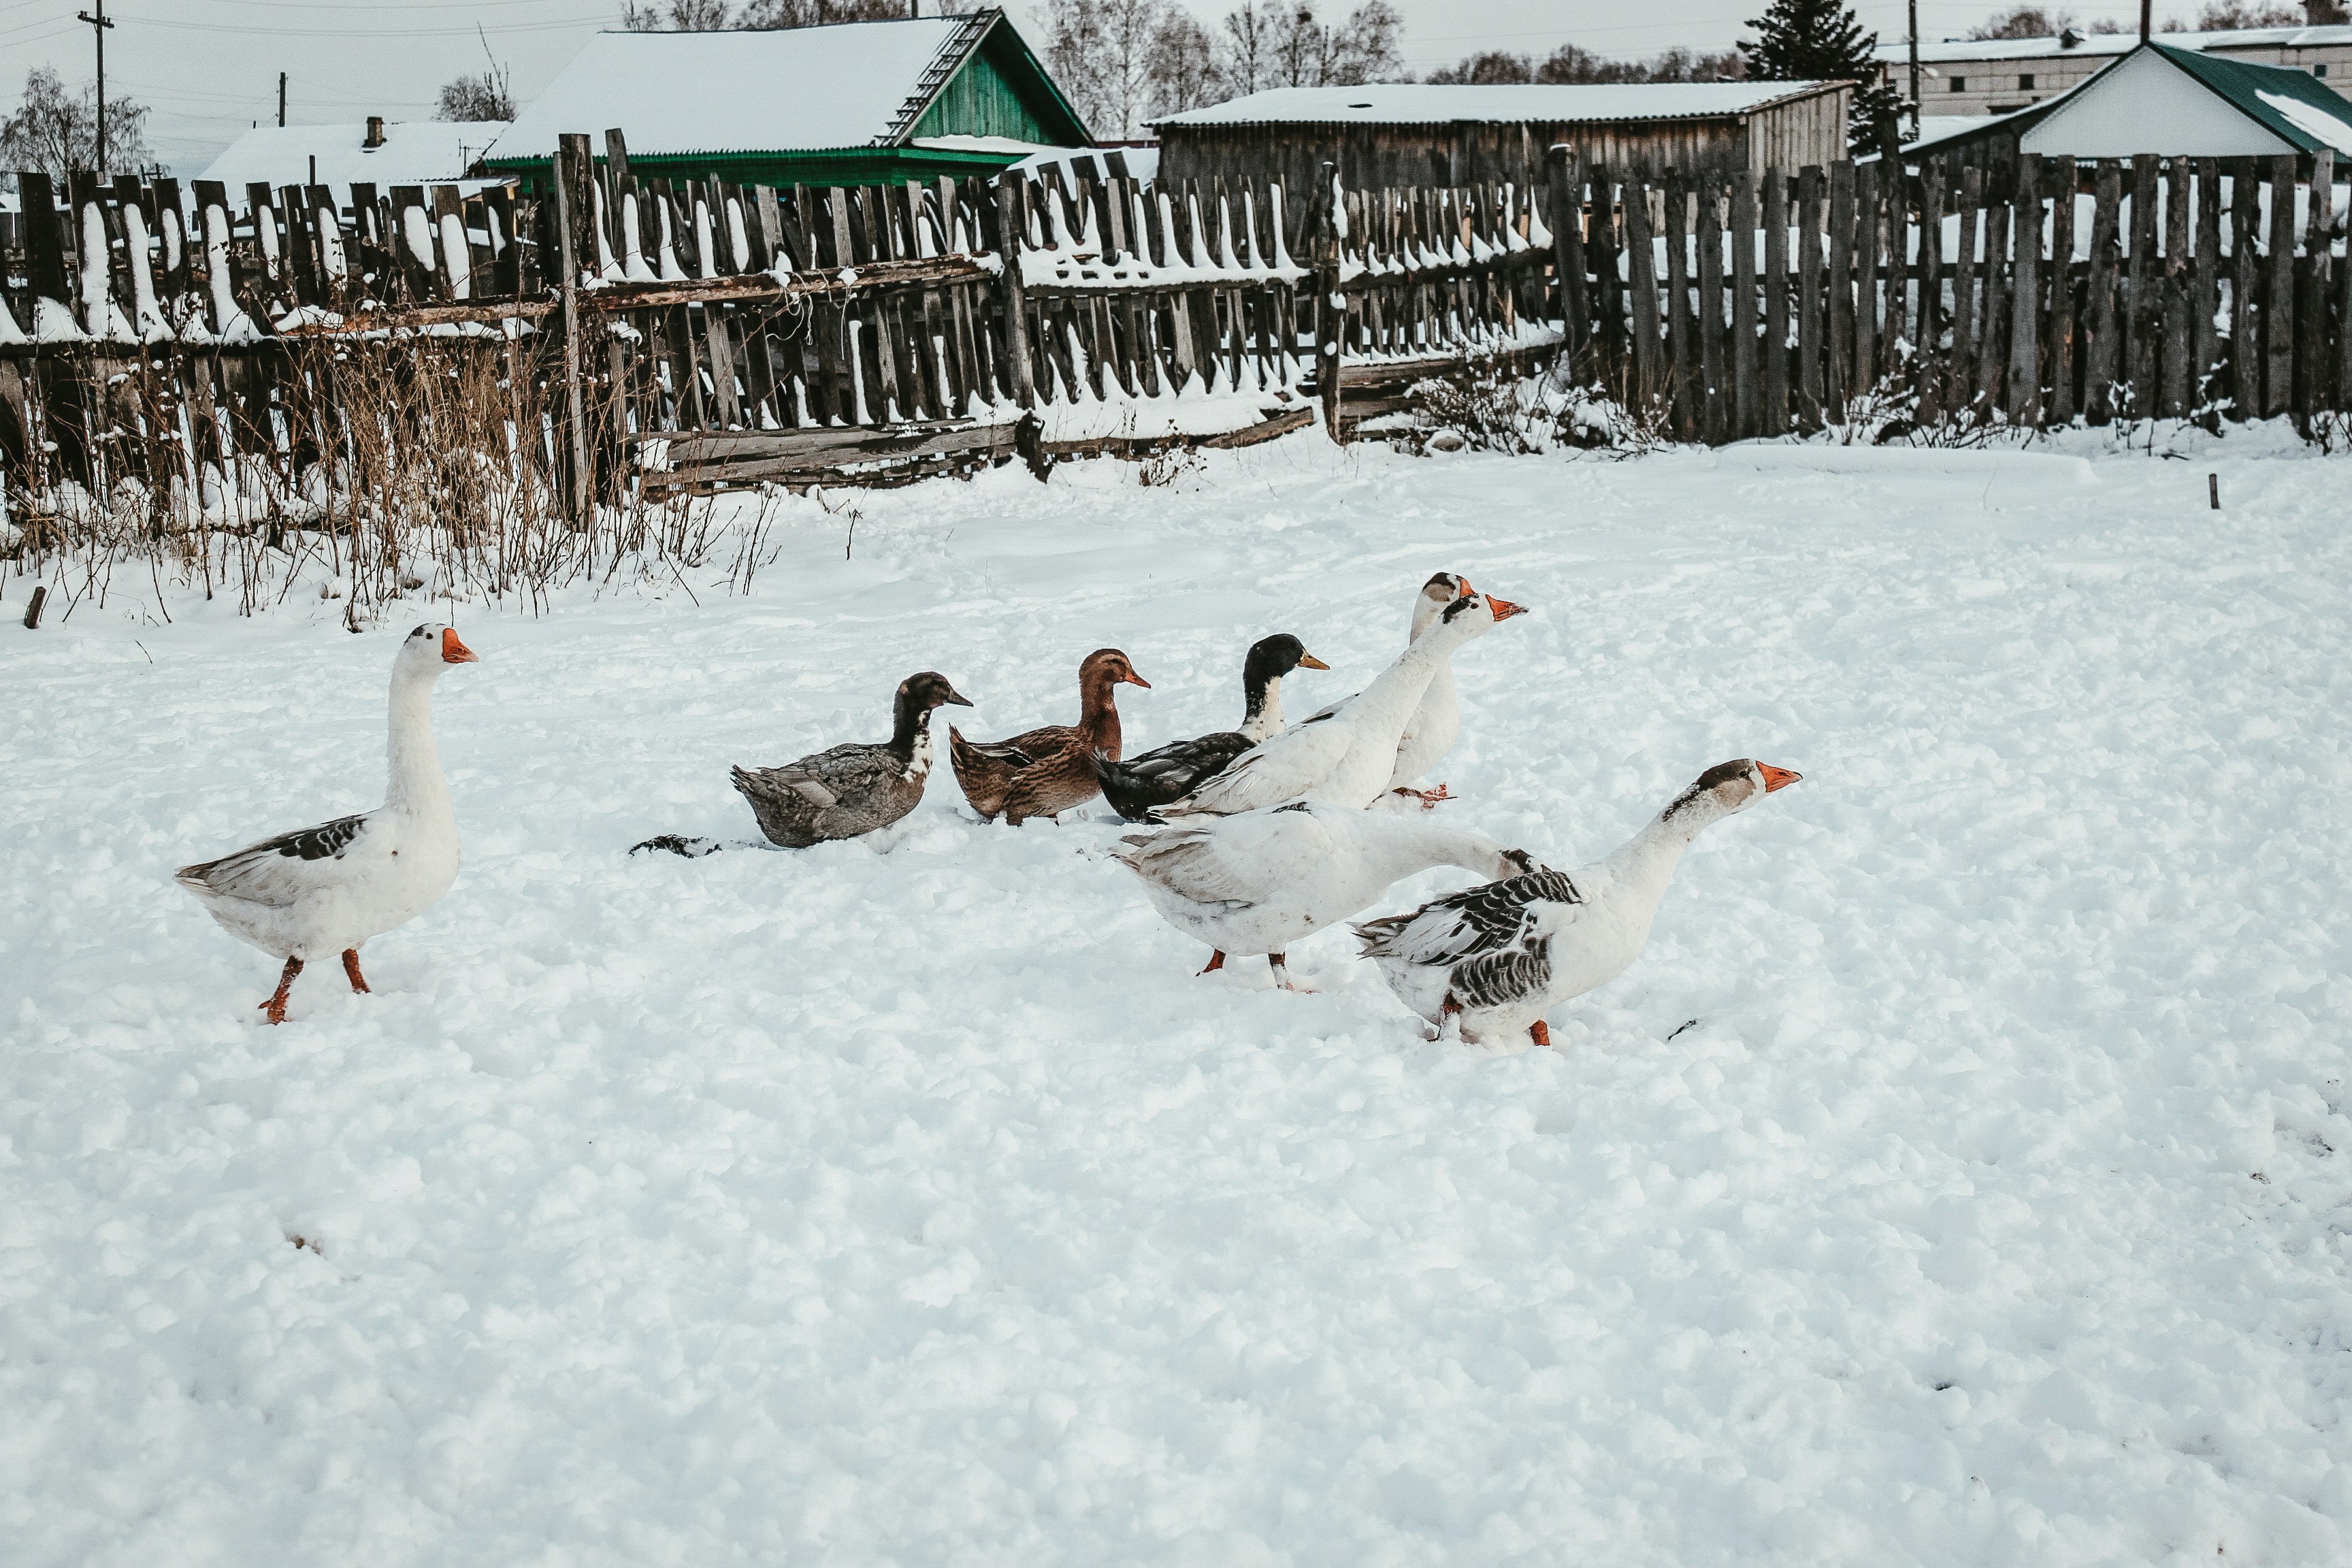 flock of geese on snow covered ground during daytime